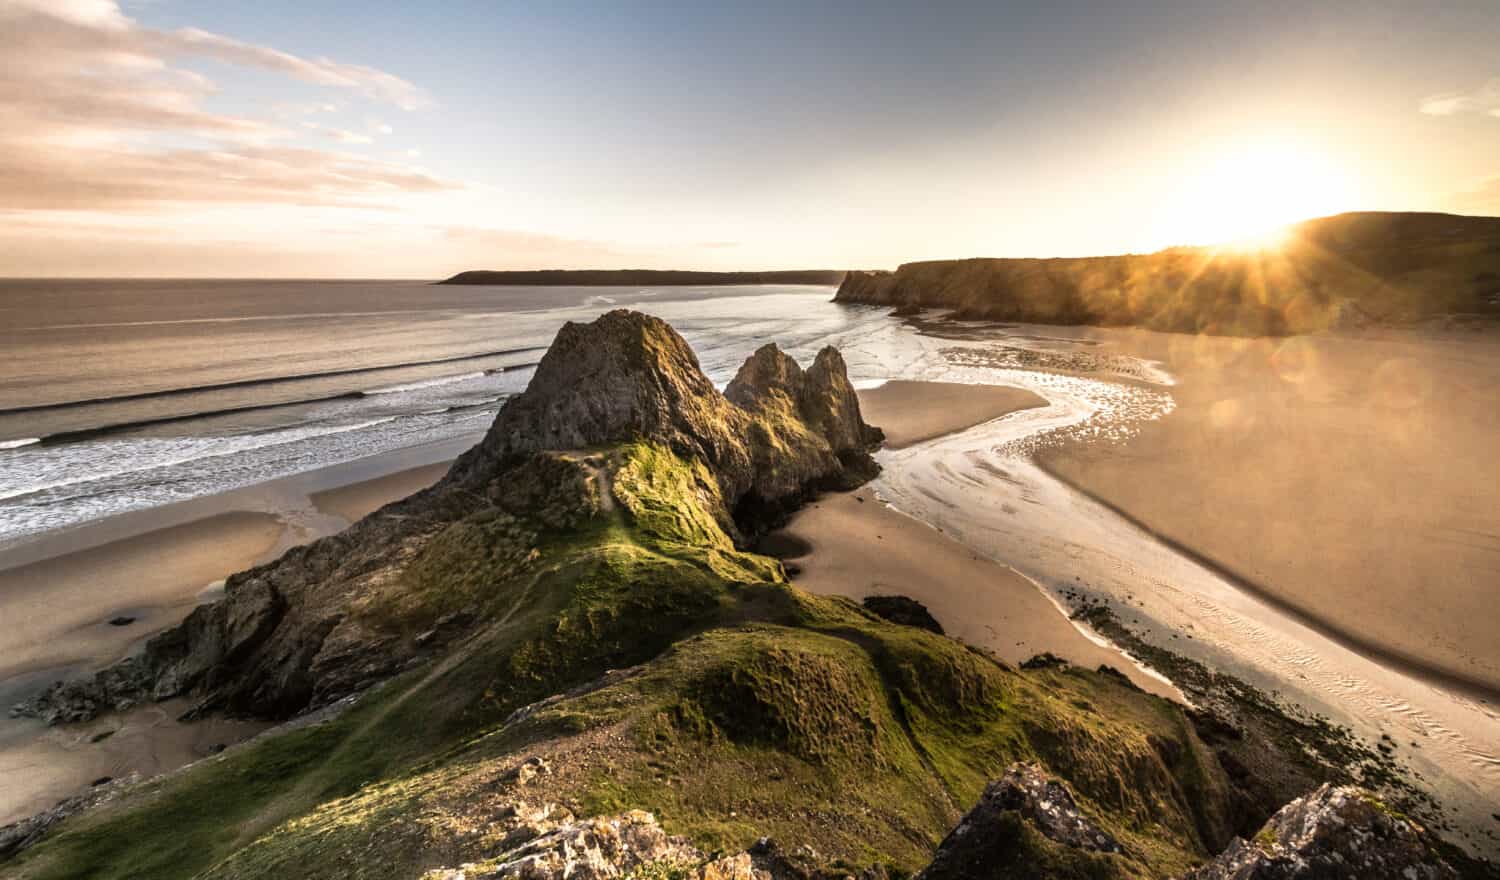 Panoramic of suntset at Three Cliffs in the Gower Peninsula, South Wales, UK. Taken May 2018